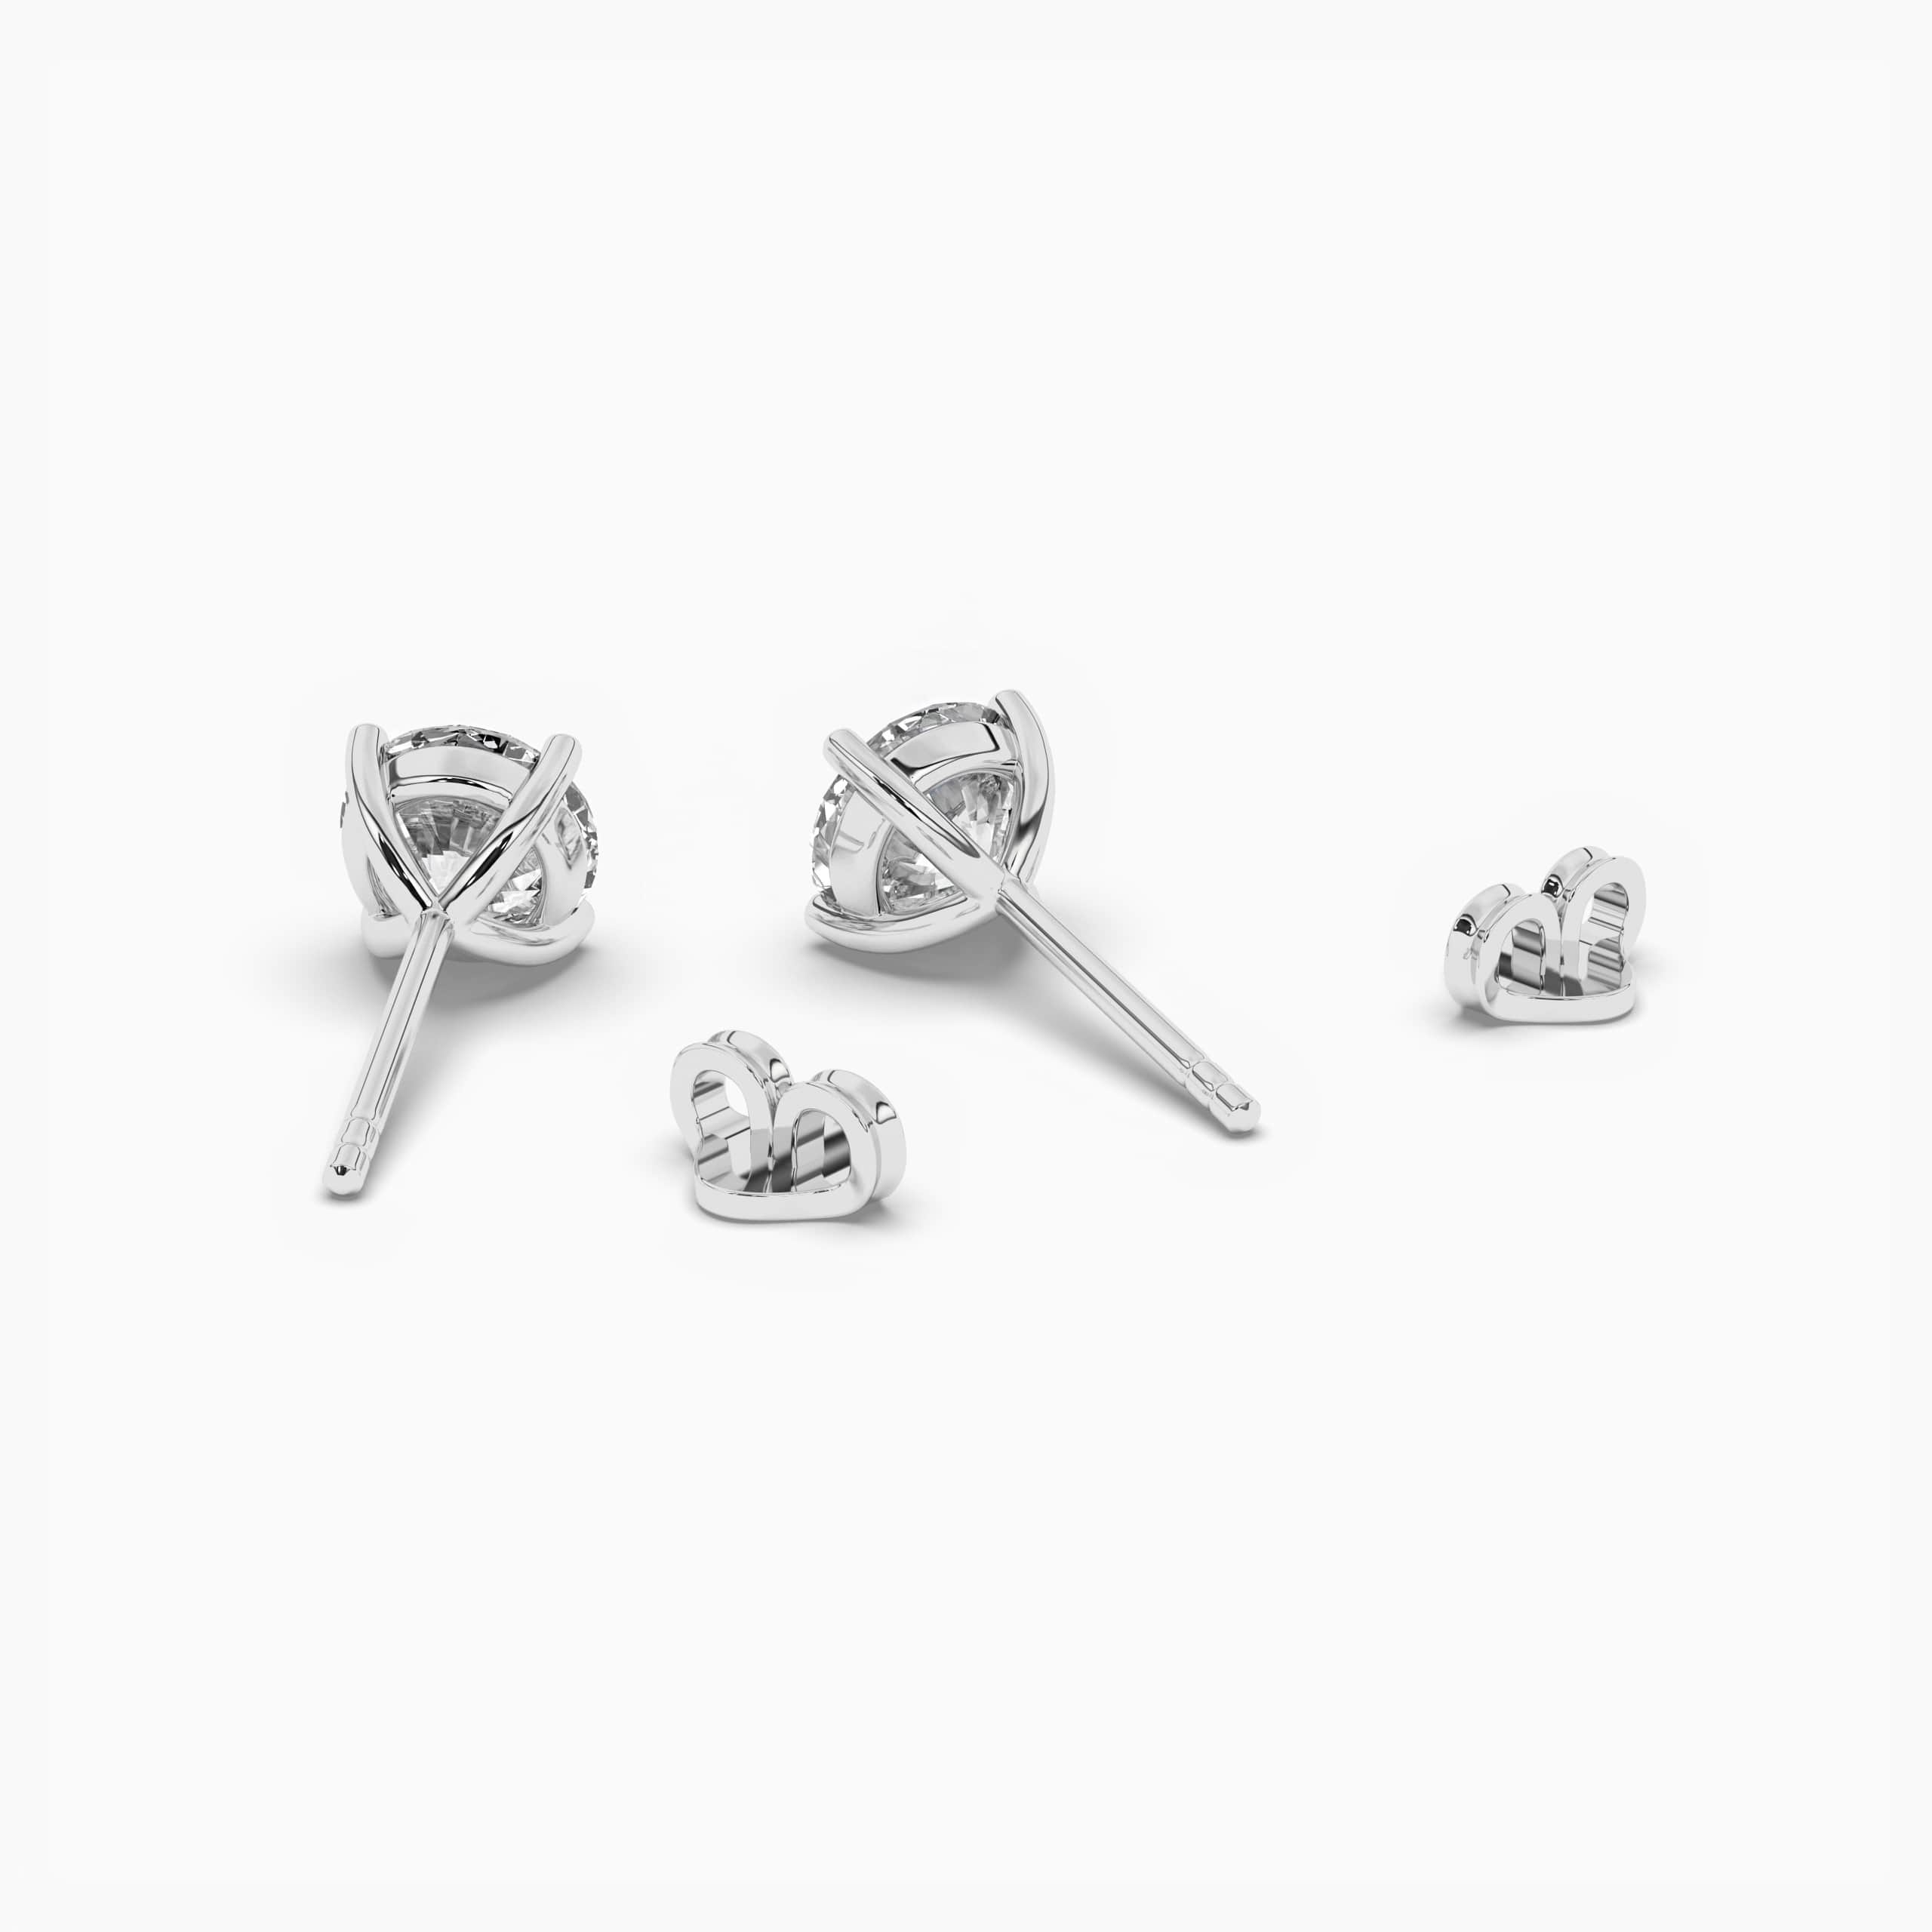 Round Cut Diamond Solitaire Stud Earrings in White Gold